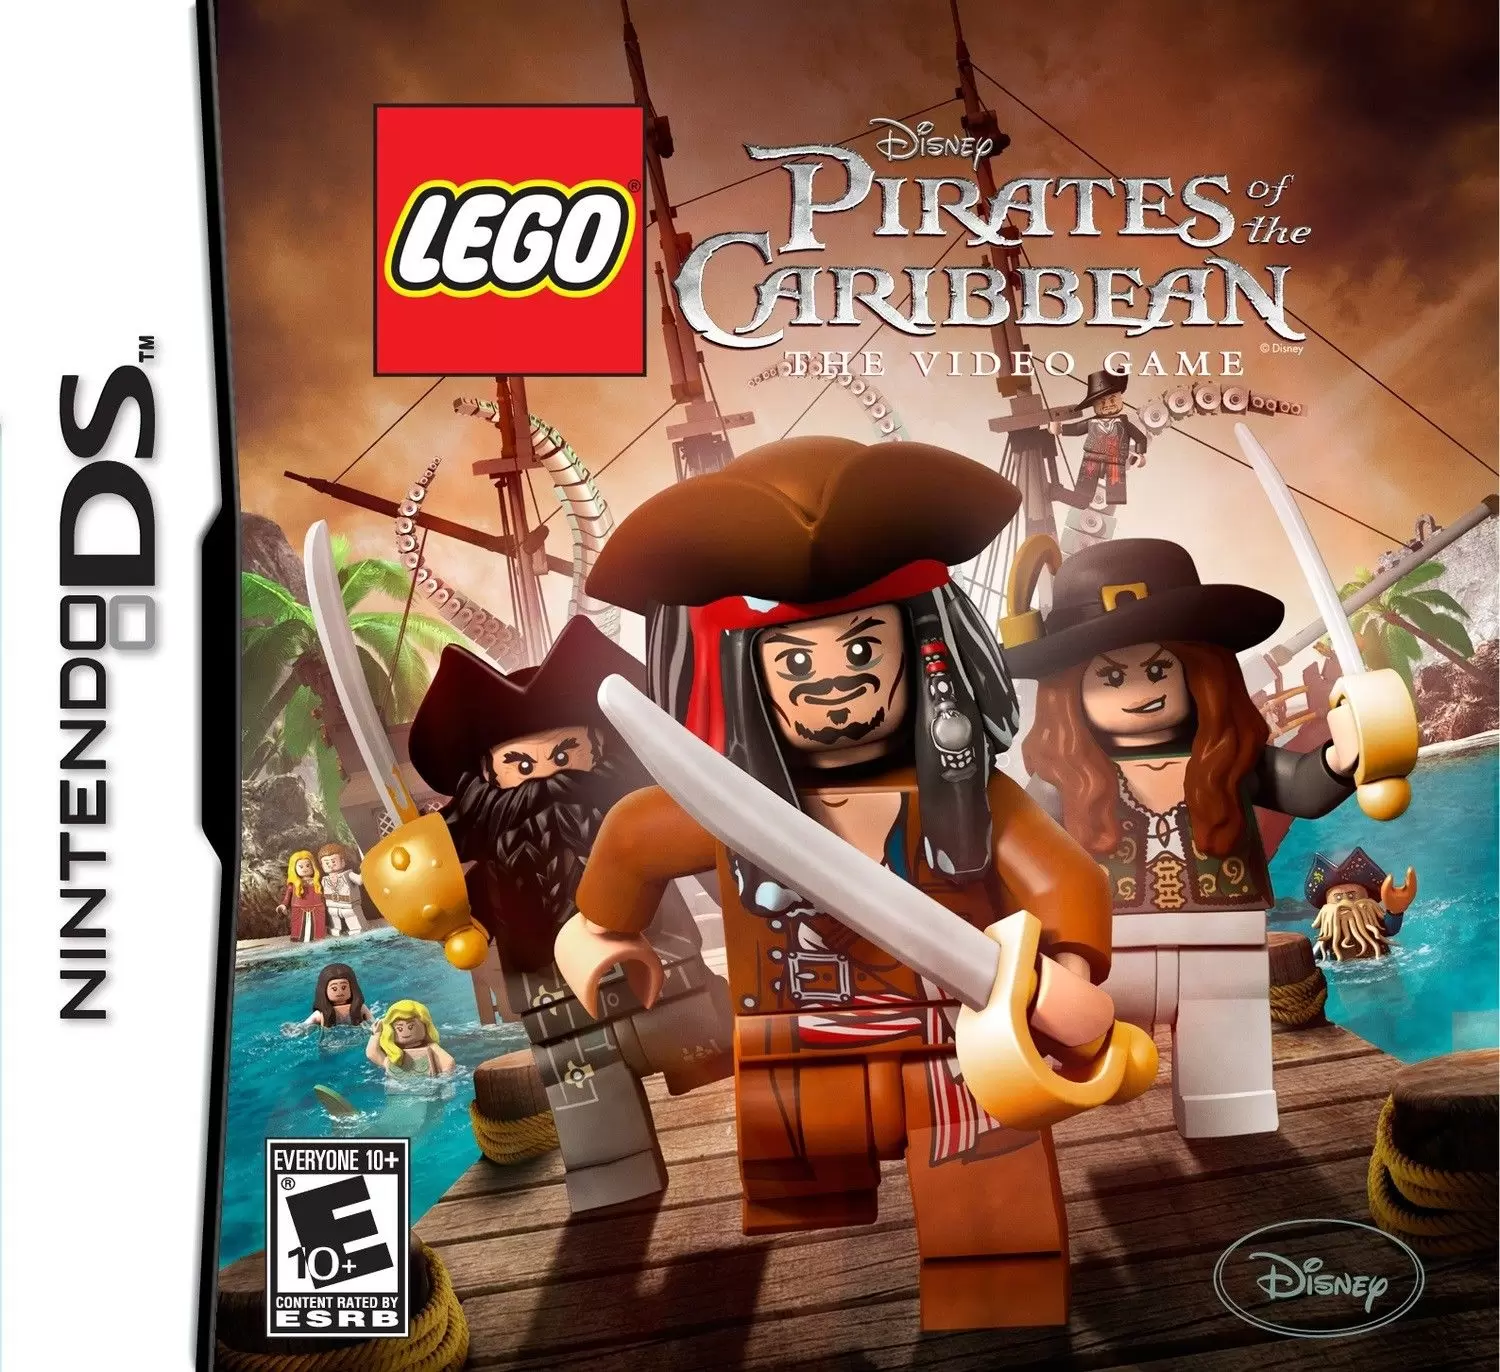 Nintendo DS Games - LEGO Pirates of the Caribbean: The Video Game